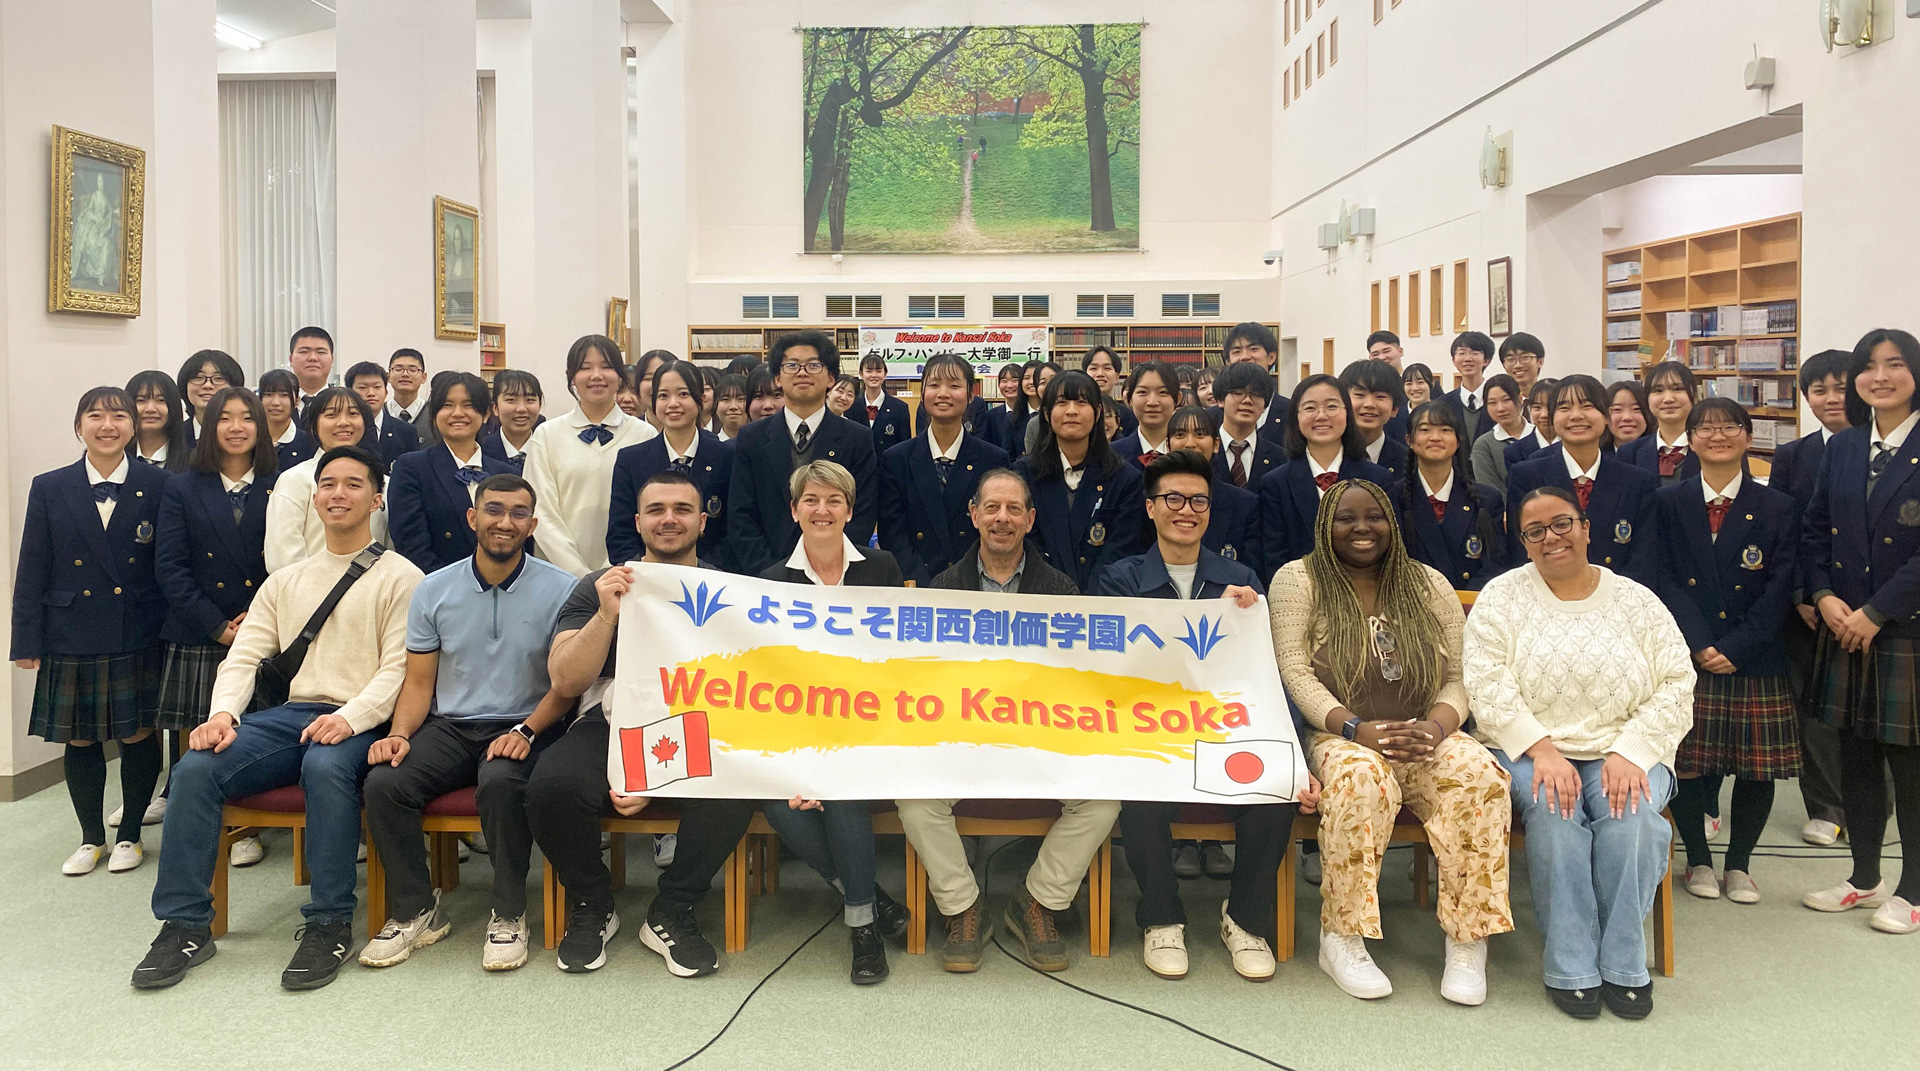 A group photo with a banner that says, "Welcome to Kansai Soka" in Japanese and then English